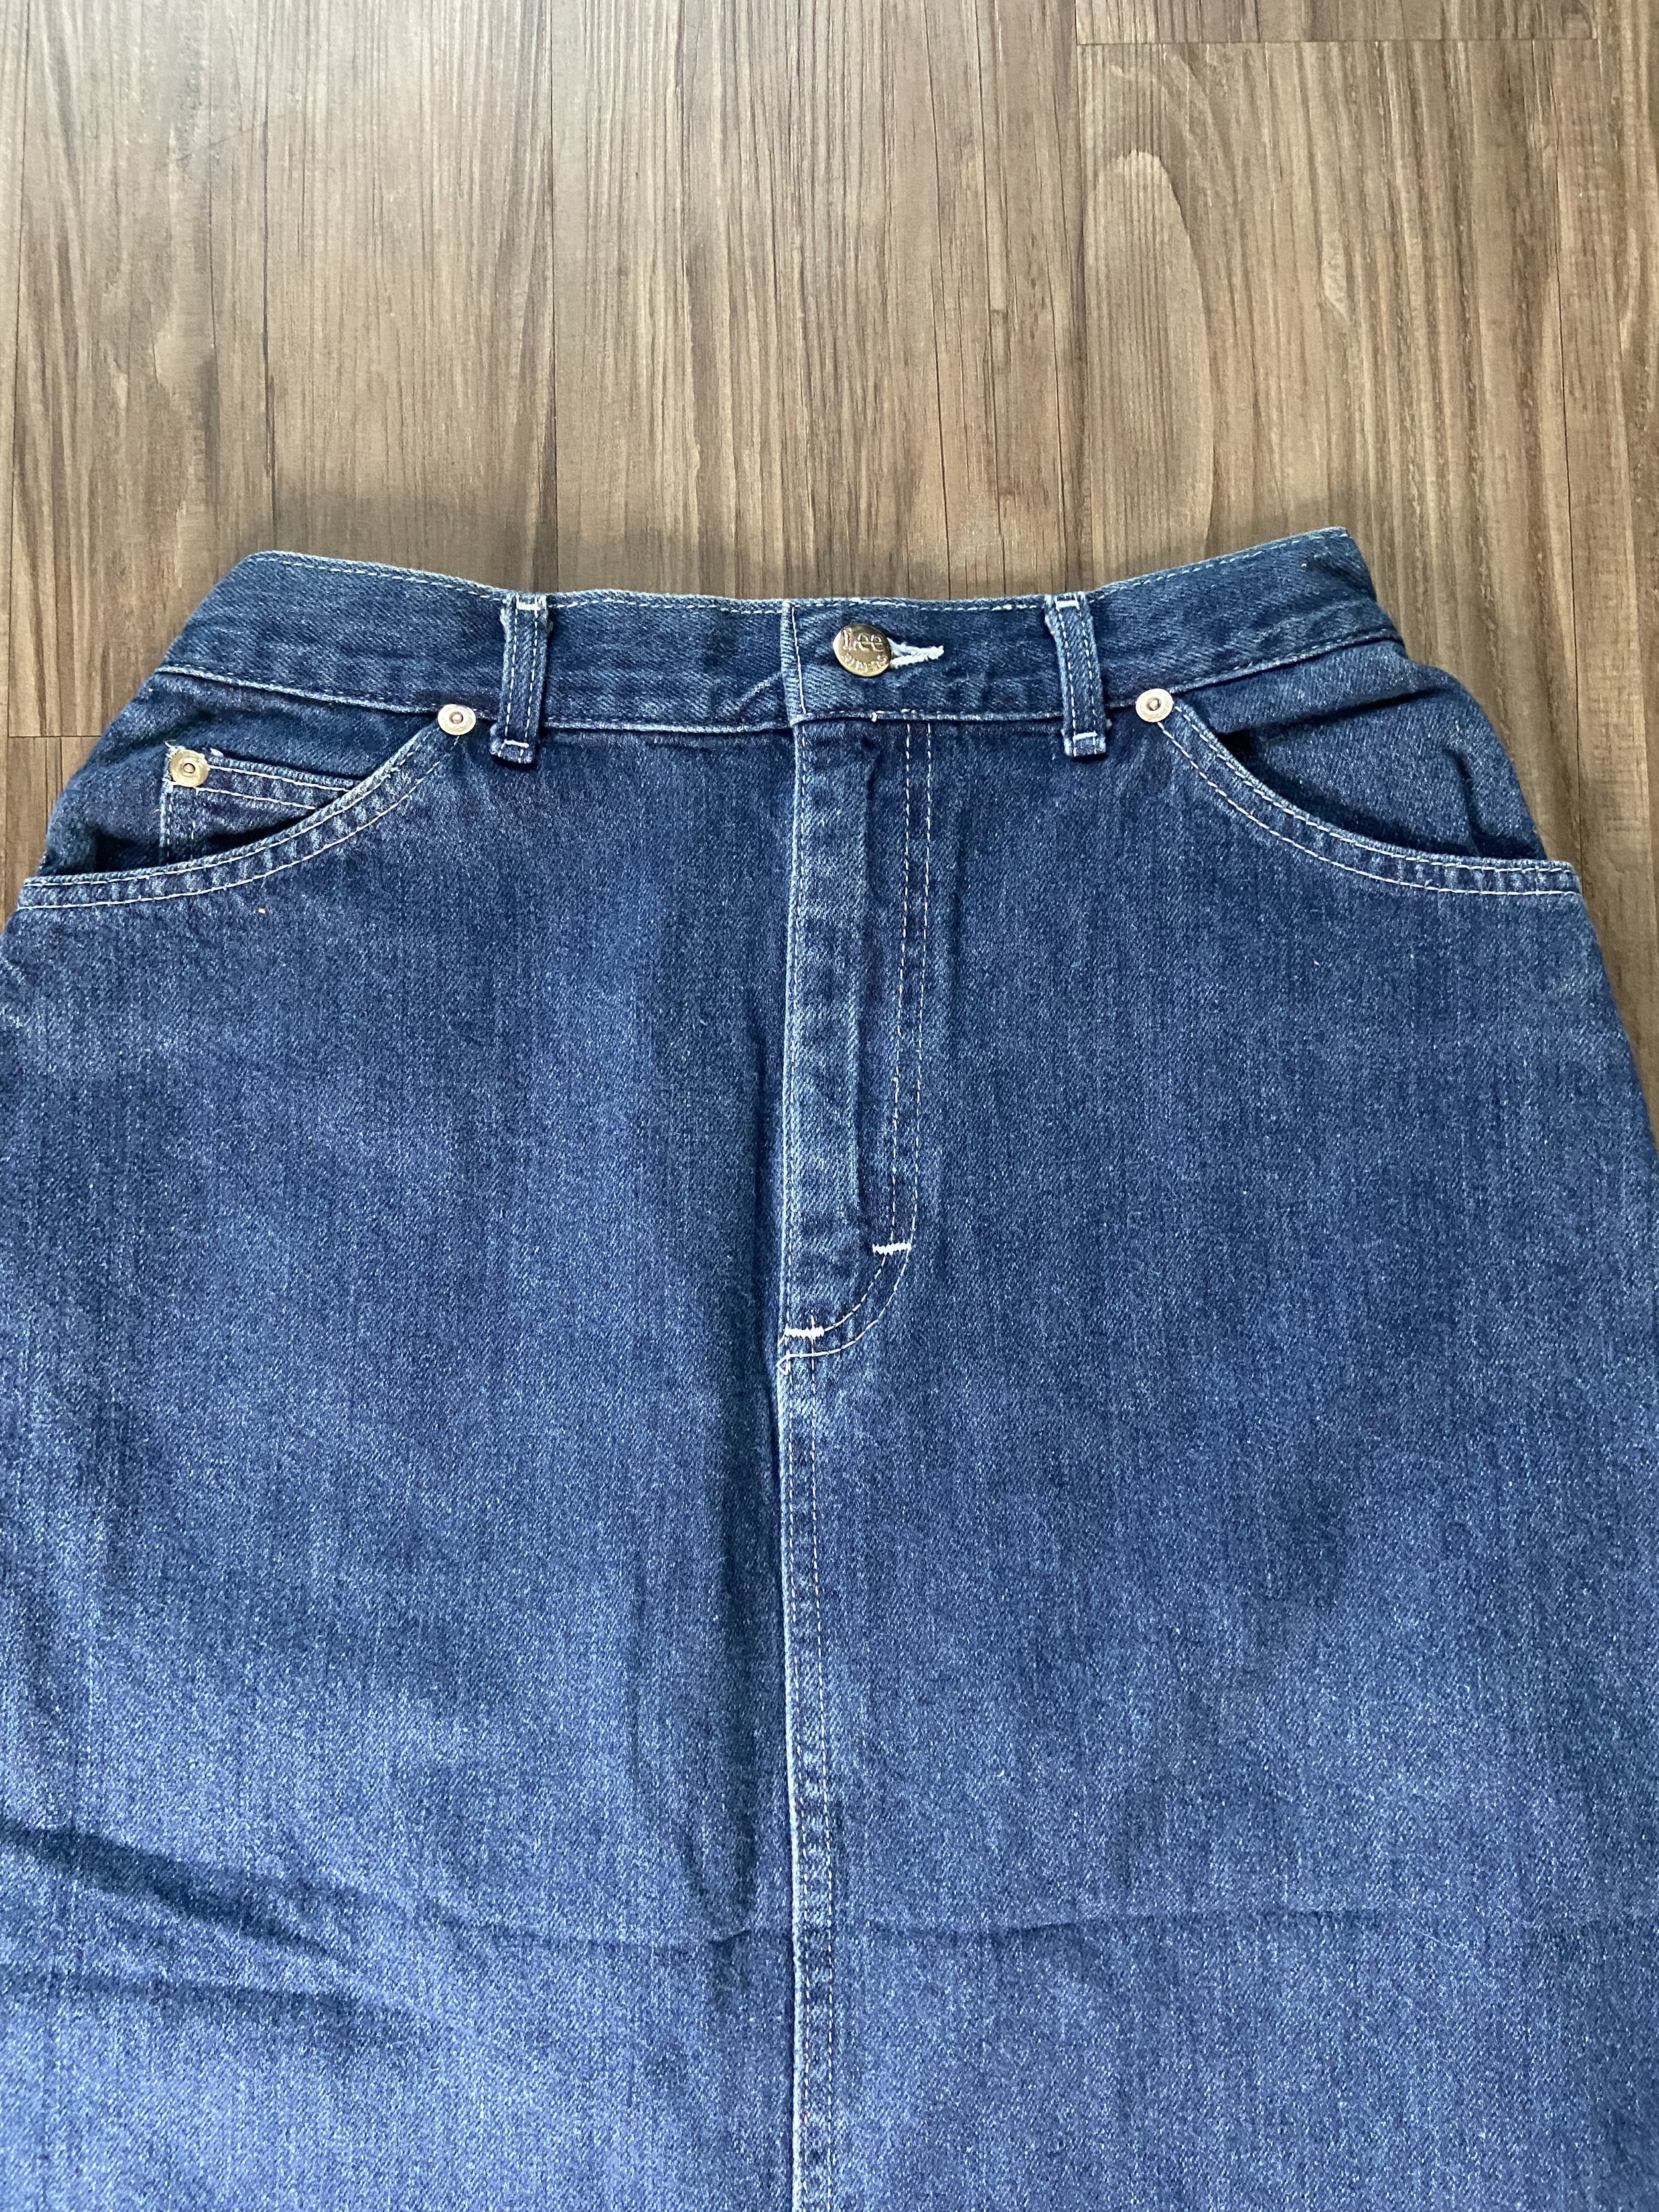 Vintage Lee Riders Zipper Fly Denim Blue Jean Skirt with Sexy